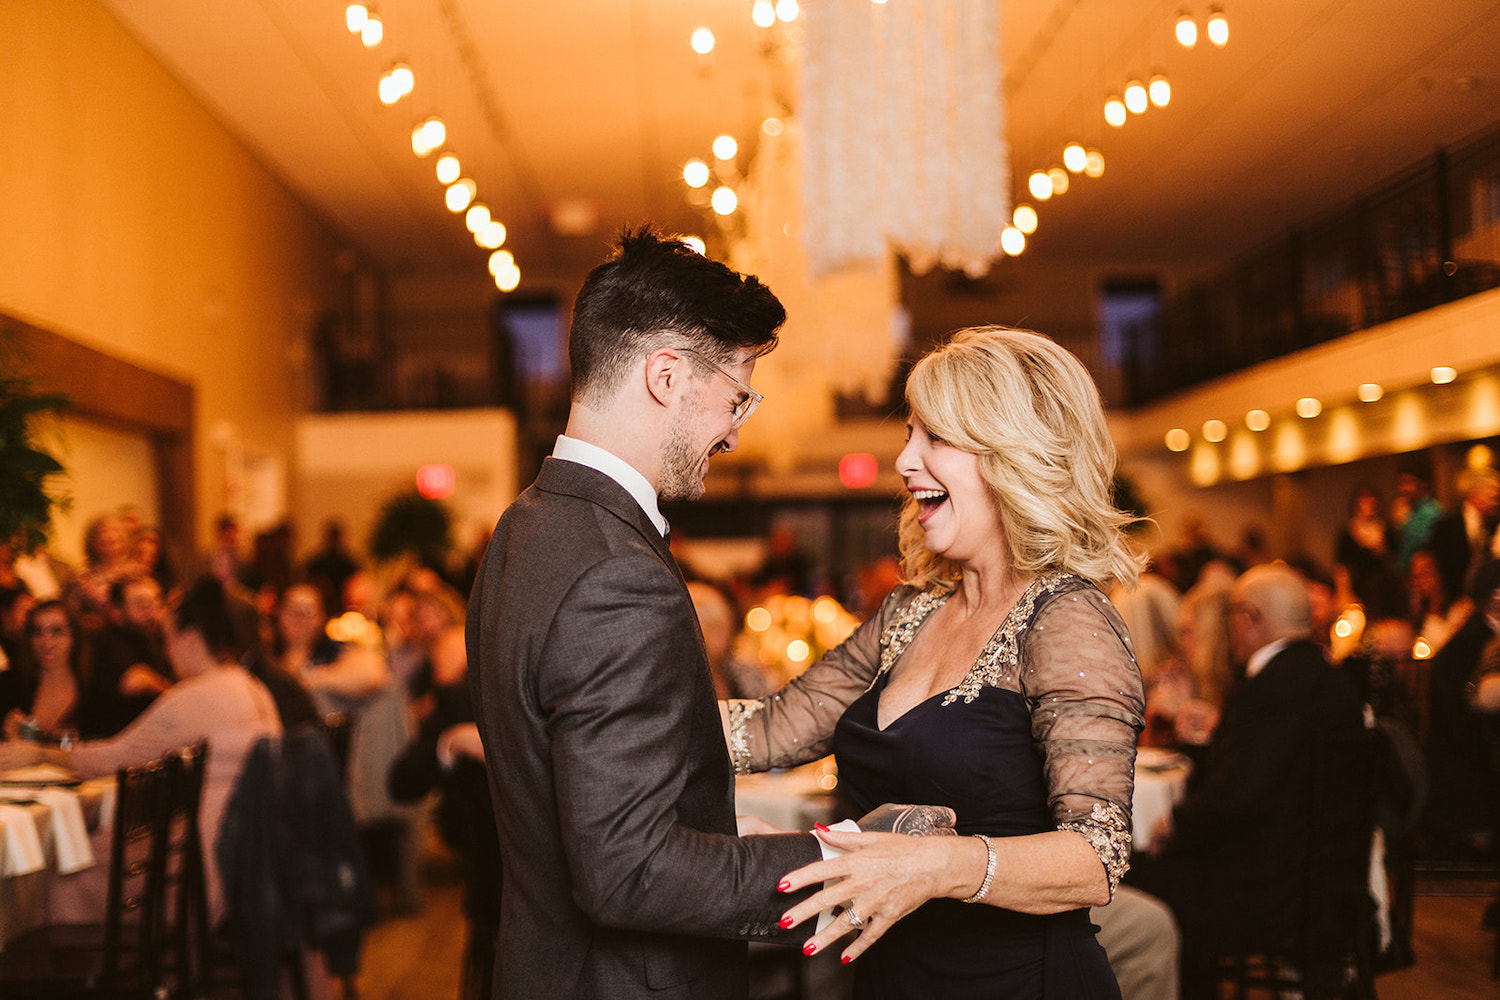 mother of the groom laughs as he reaches toward her during their dance together